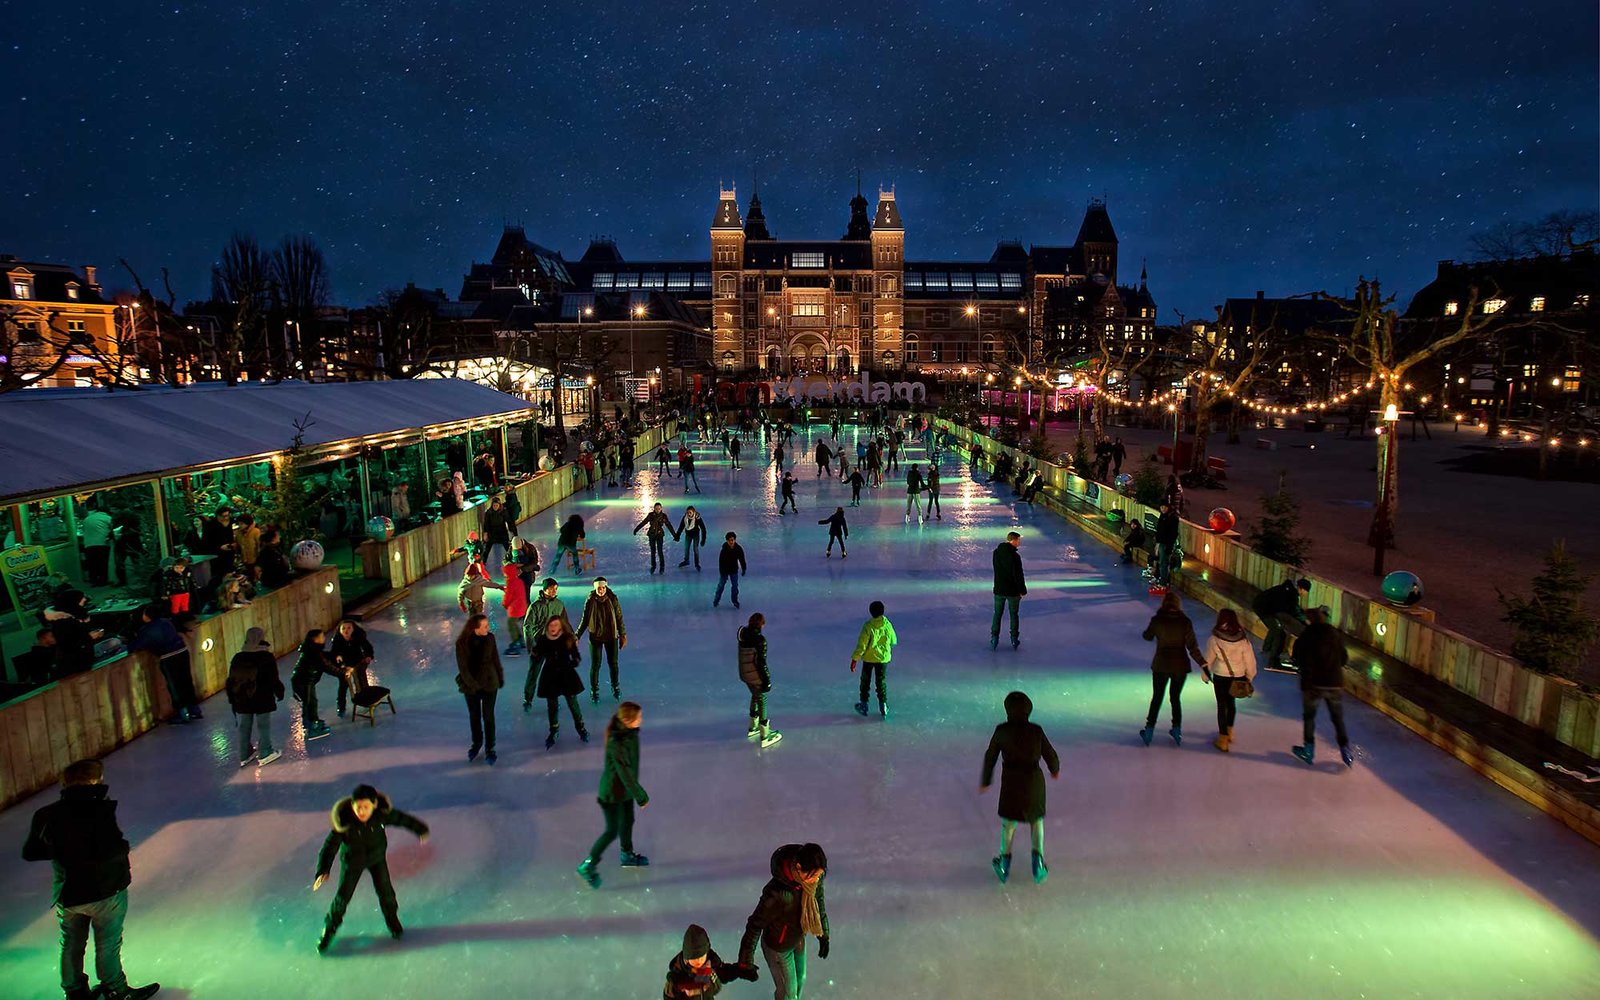 [UNVERIFIED CONTENT] Crowded ice skating rink with starry sky at night, Museumplein Amsterdam. In front of the Rijksmuseum.